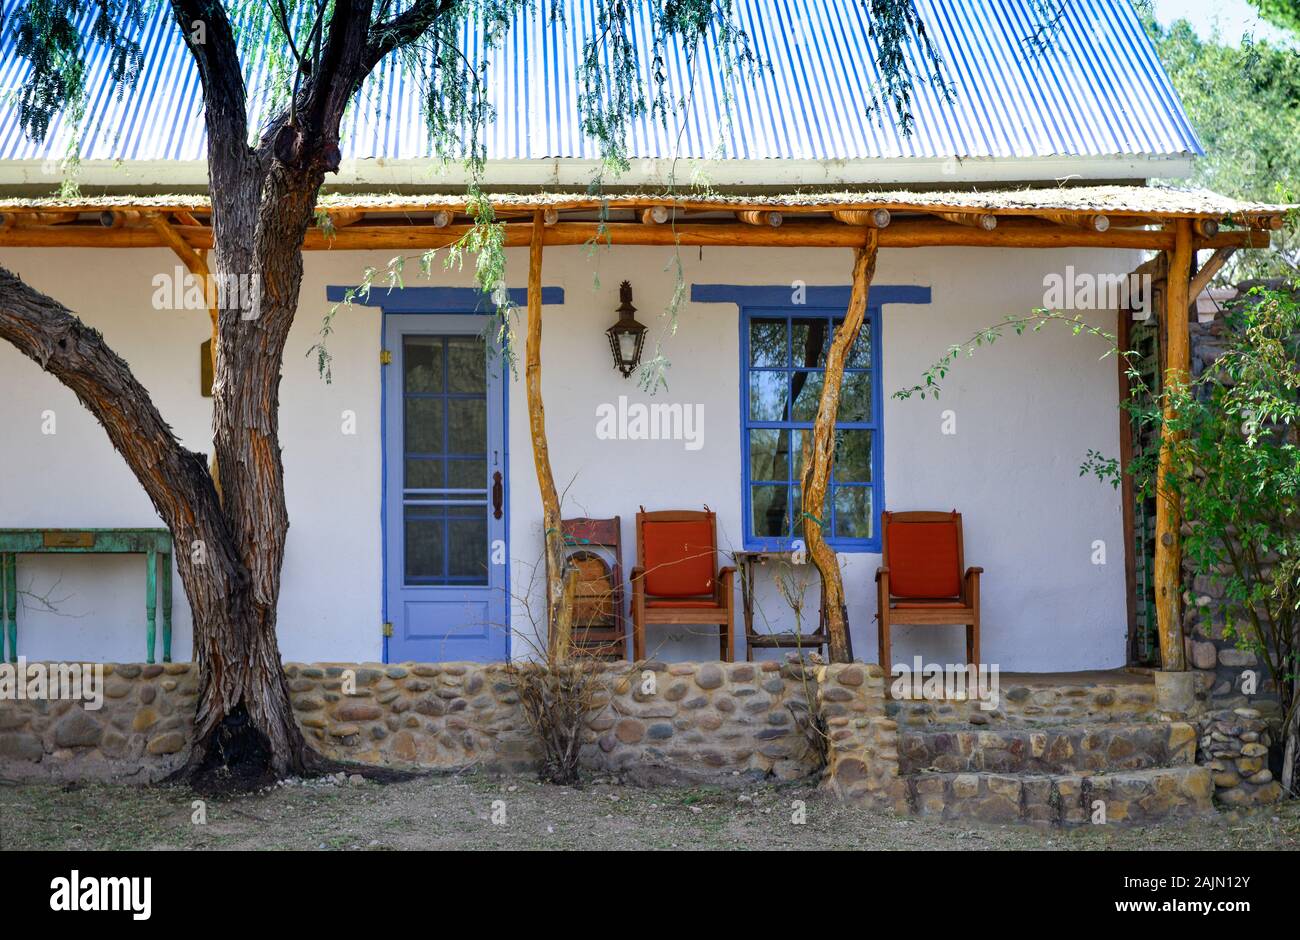 A Mesquite tree near the pole and tree post porch of a Spanish influenced adobe home with red chairs on porch in artisan town of Tubac, AZ, USA Stock Photo